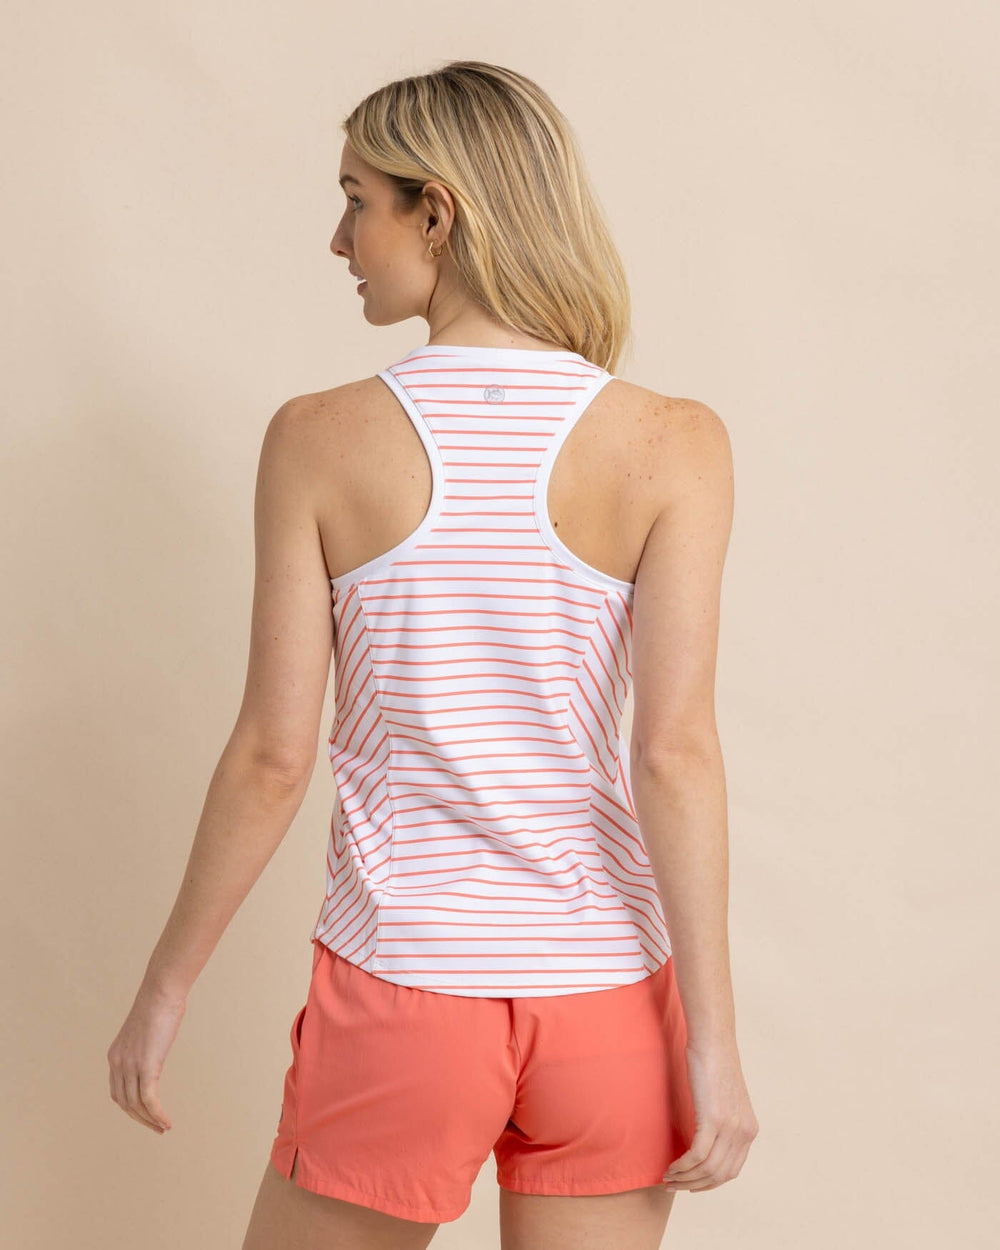 The back view of the Southern Tide Myra Stripe Racerback Tank by Southern Tide - Classic White